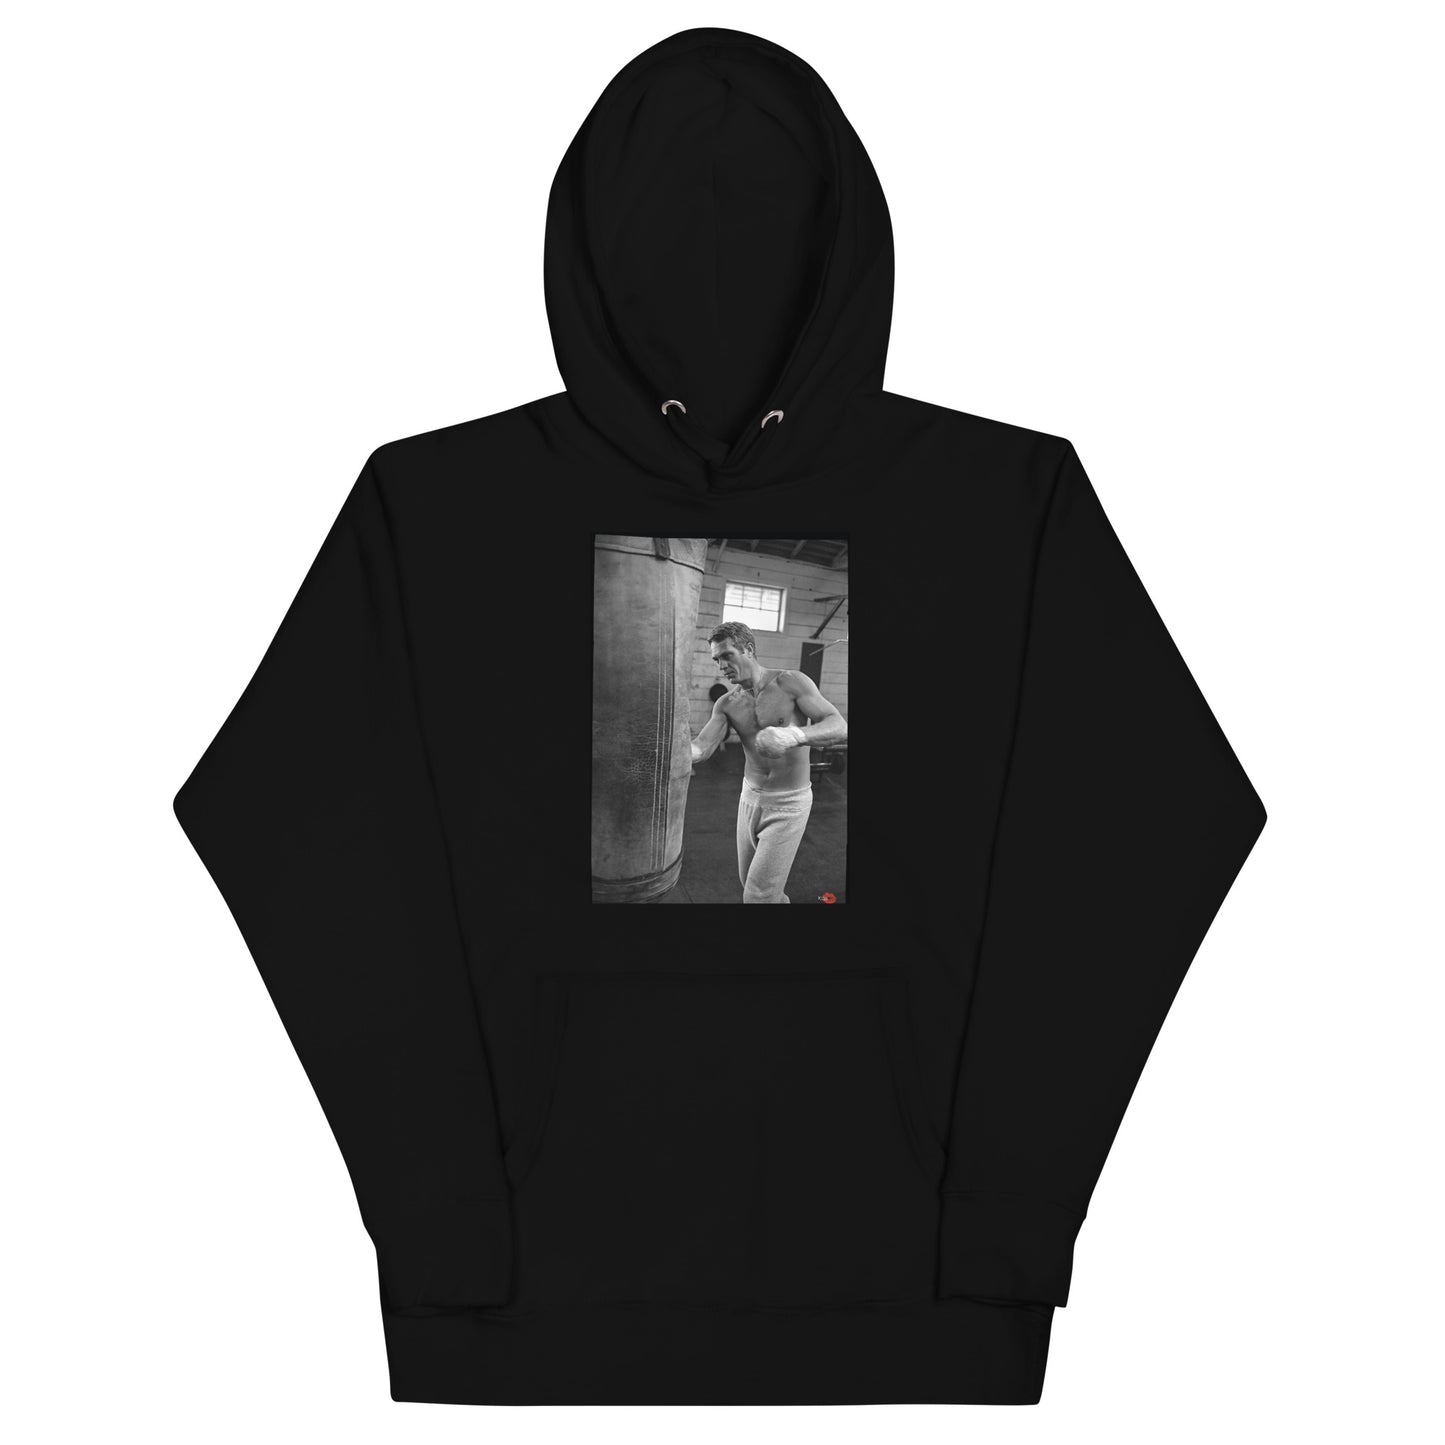 Steve McQueen Boxing Unisex Hoodie - Actor Boxer - Retro Hollywood Image